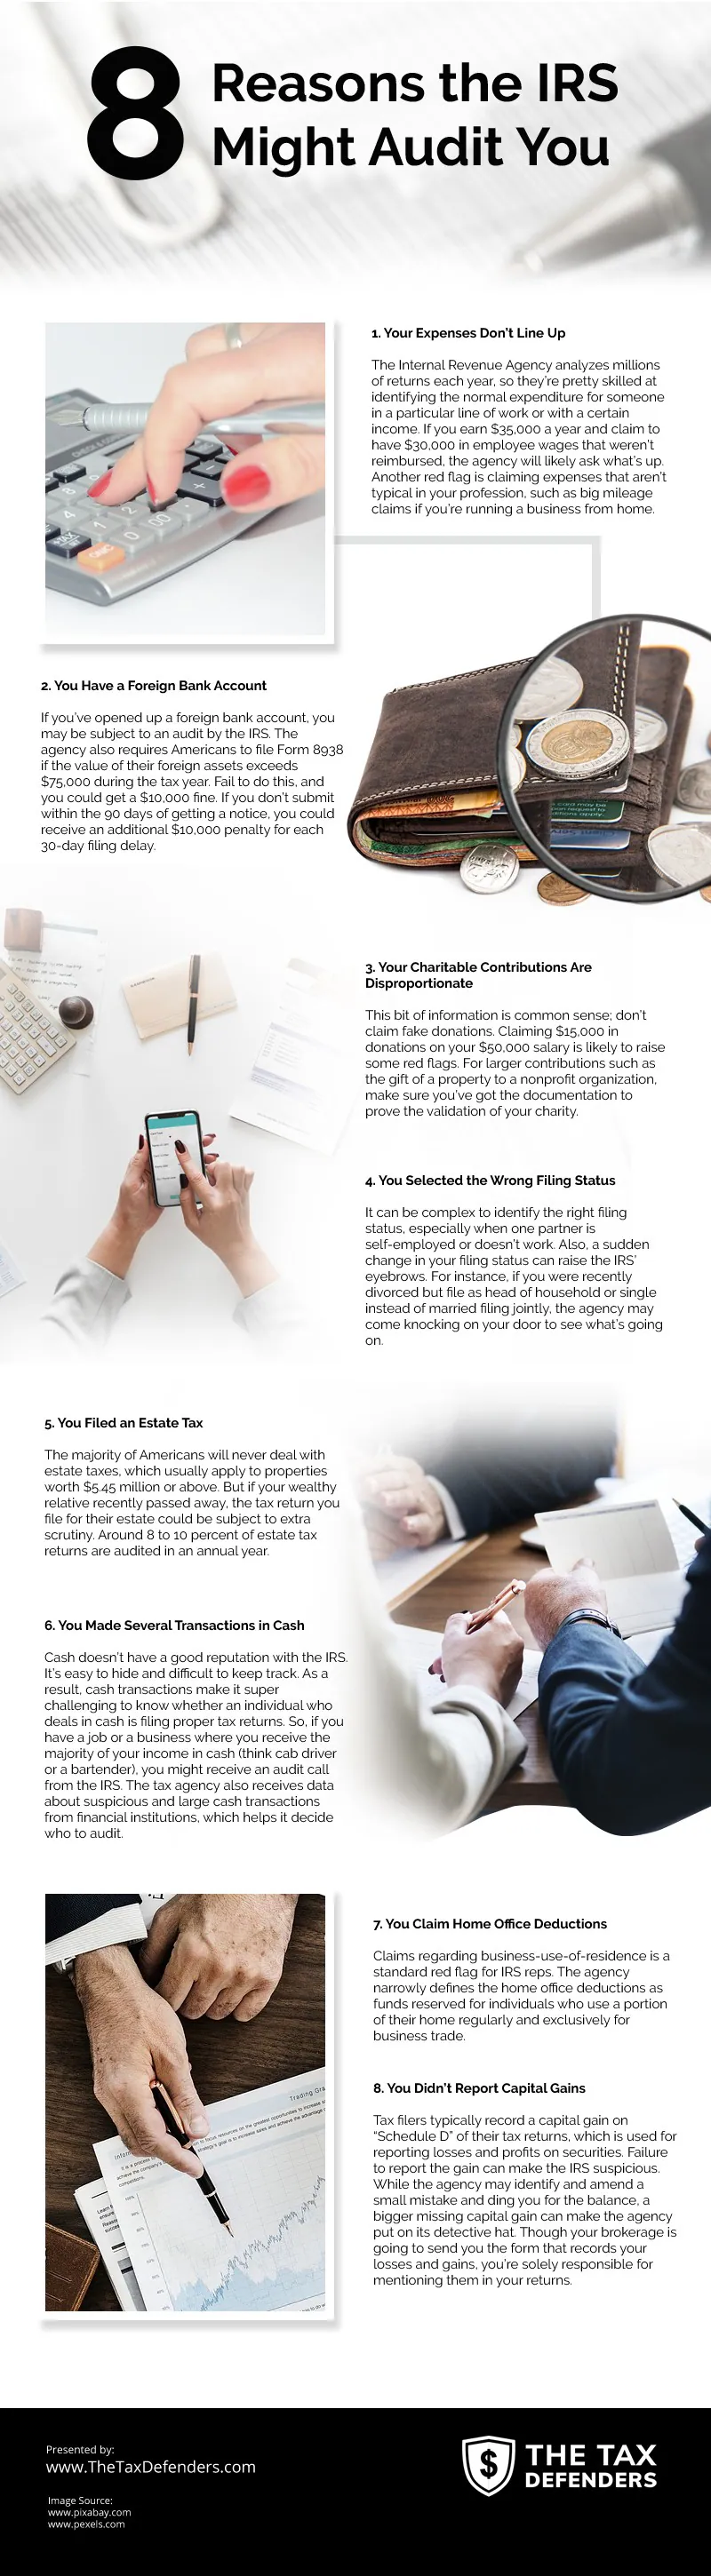 8 Reasons the IRS Might Audit You [infographic]